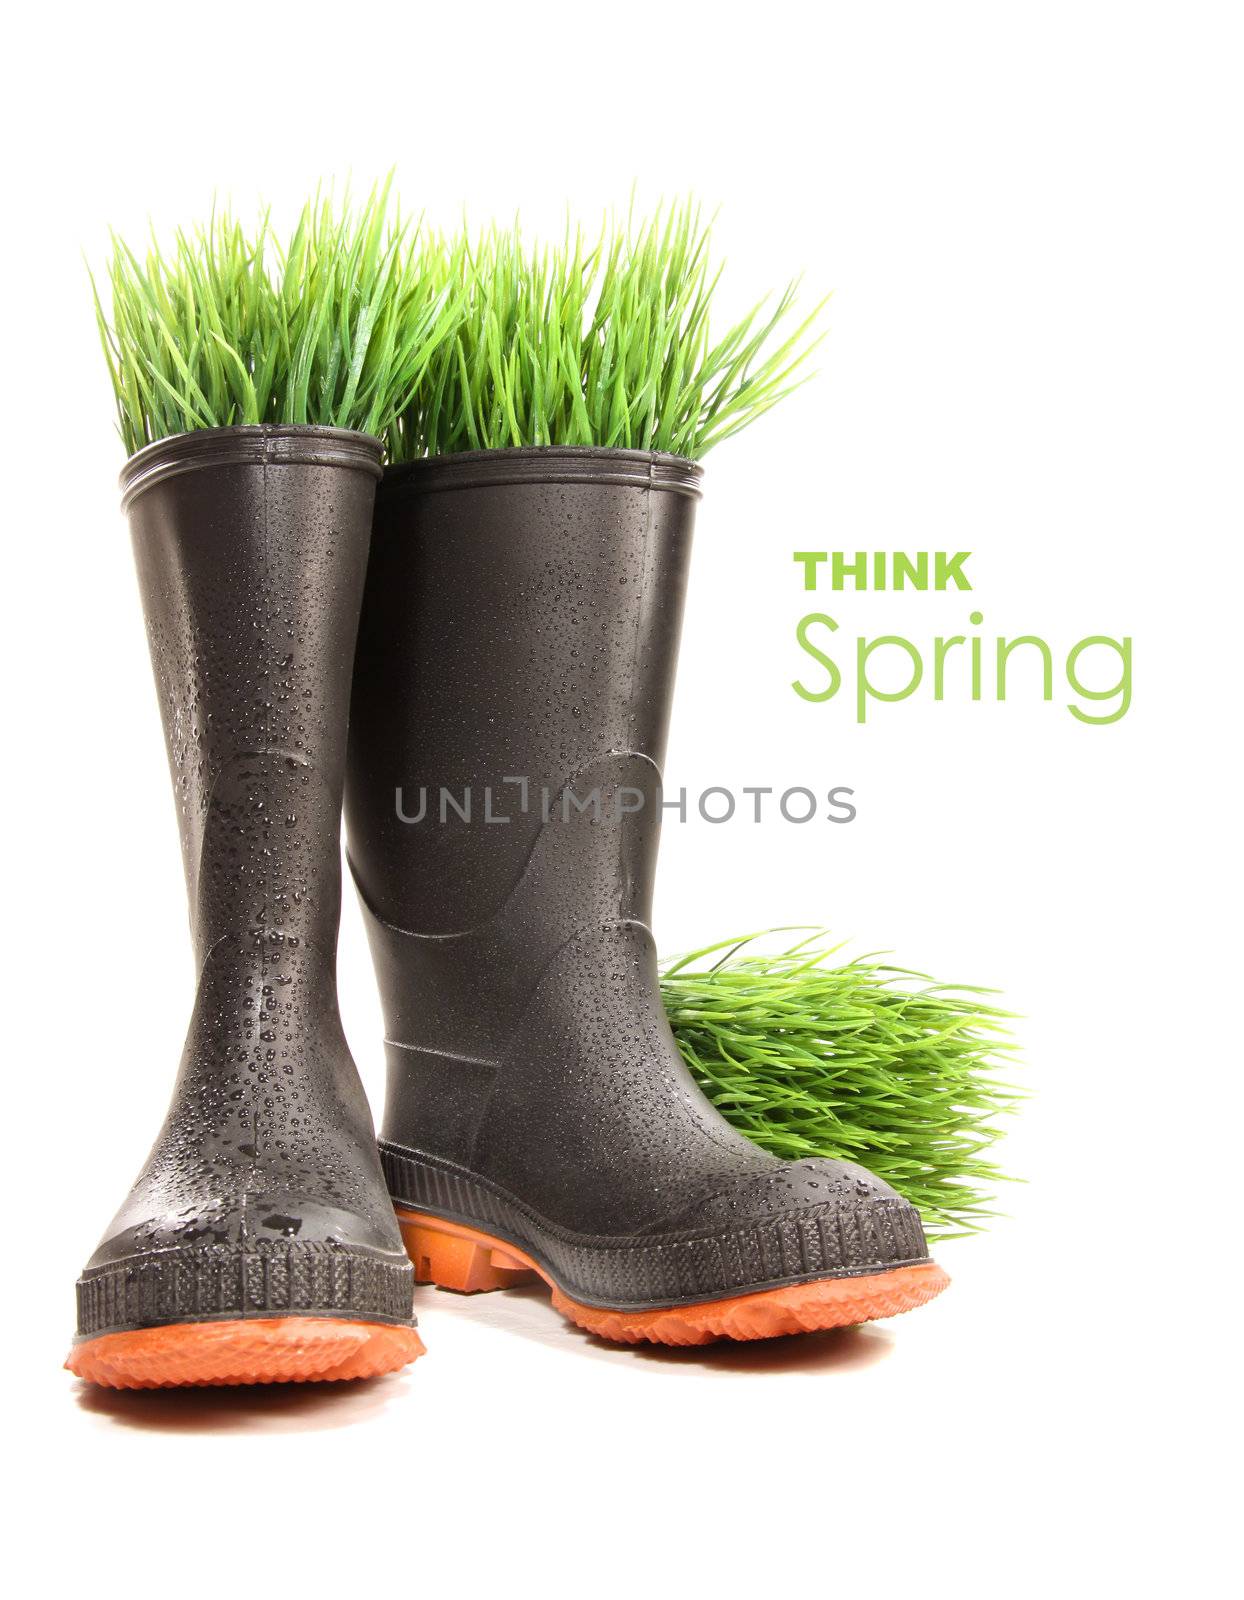 Rubber boots with grass on white by Sandralise